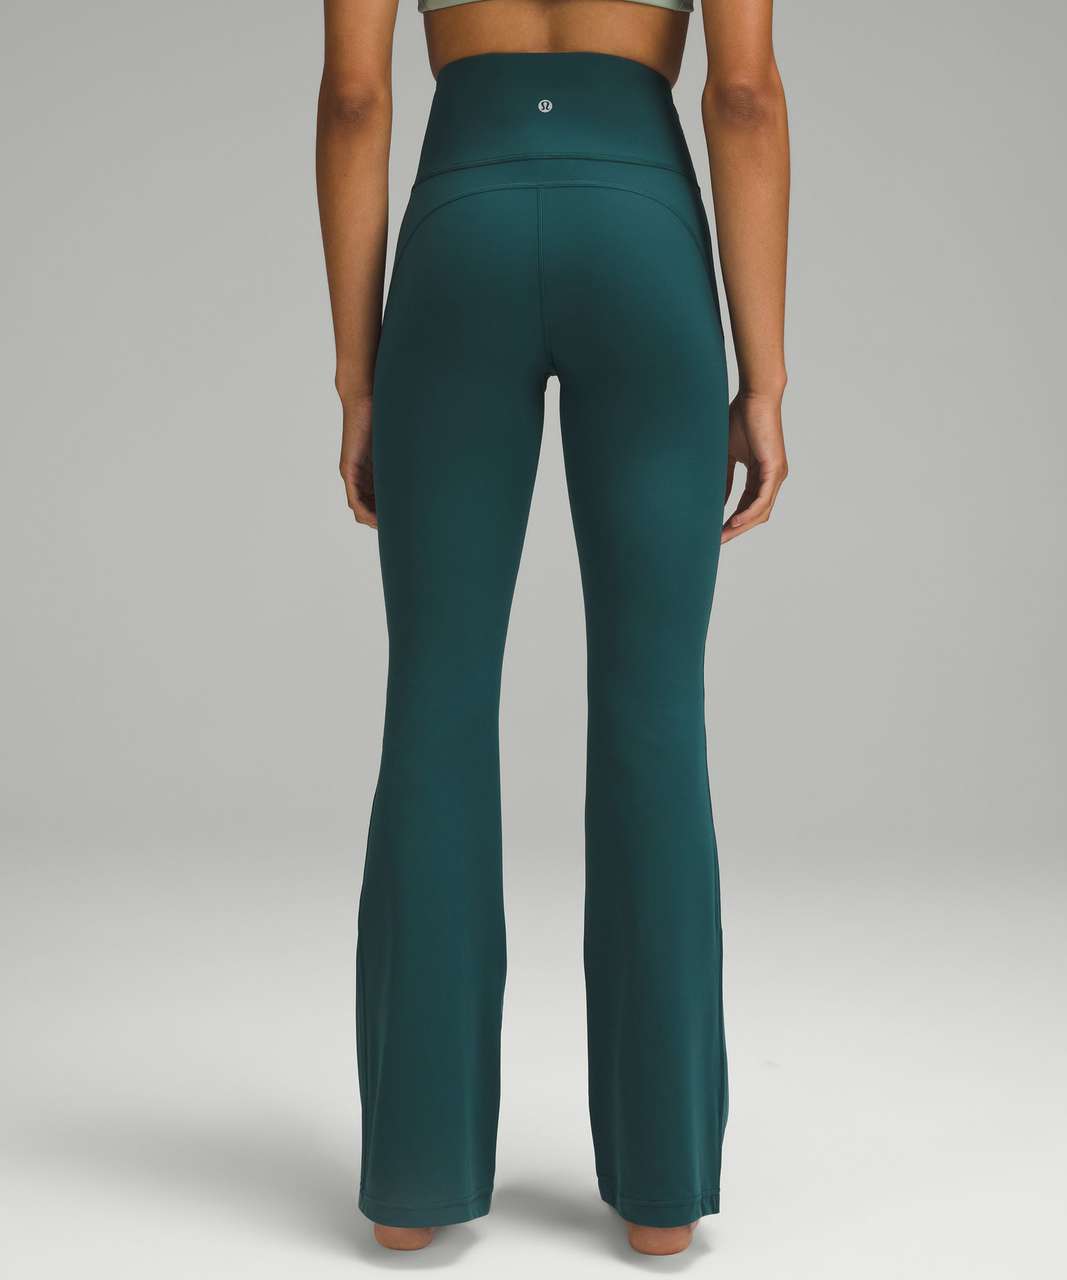 Lululemon Groove Pants Flare Super High-Rise Nulu Blue Size 4 - $80 (32%  Off Retail) - From emma